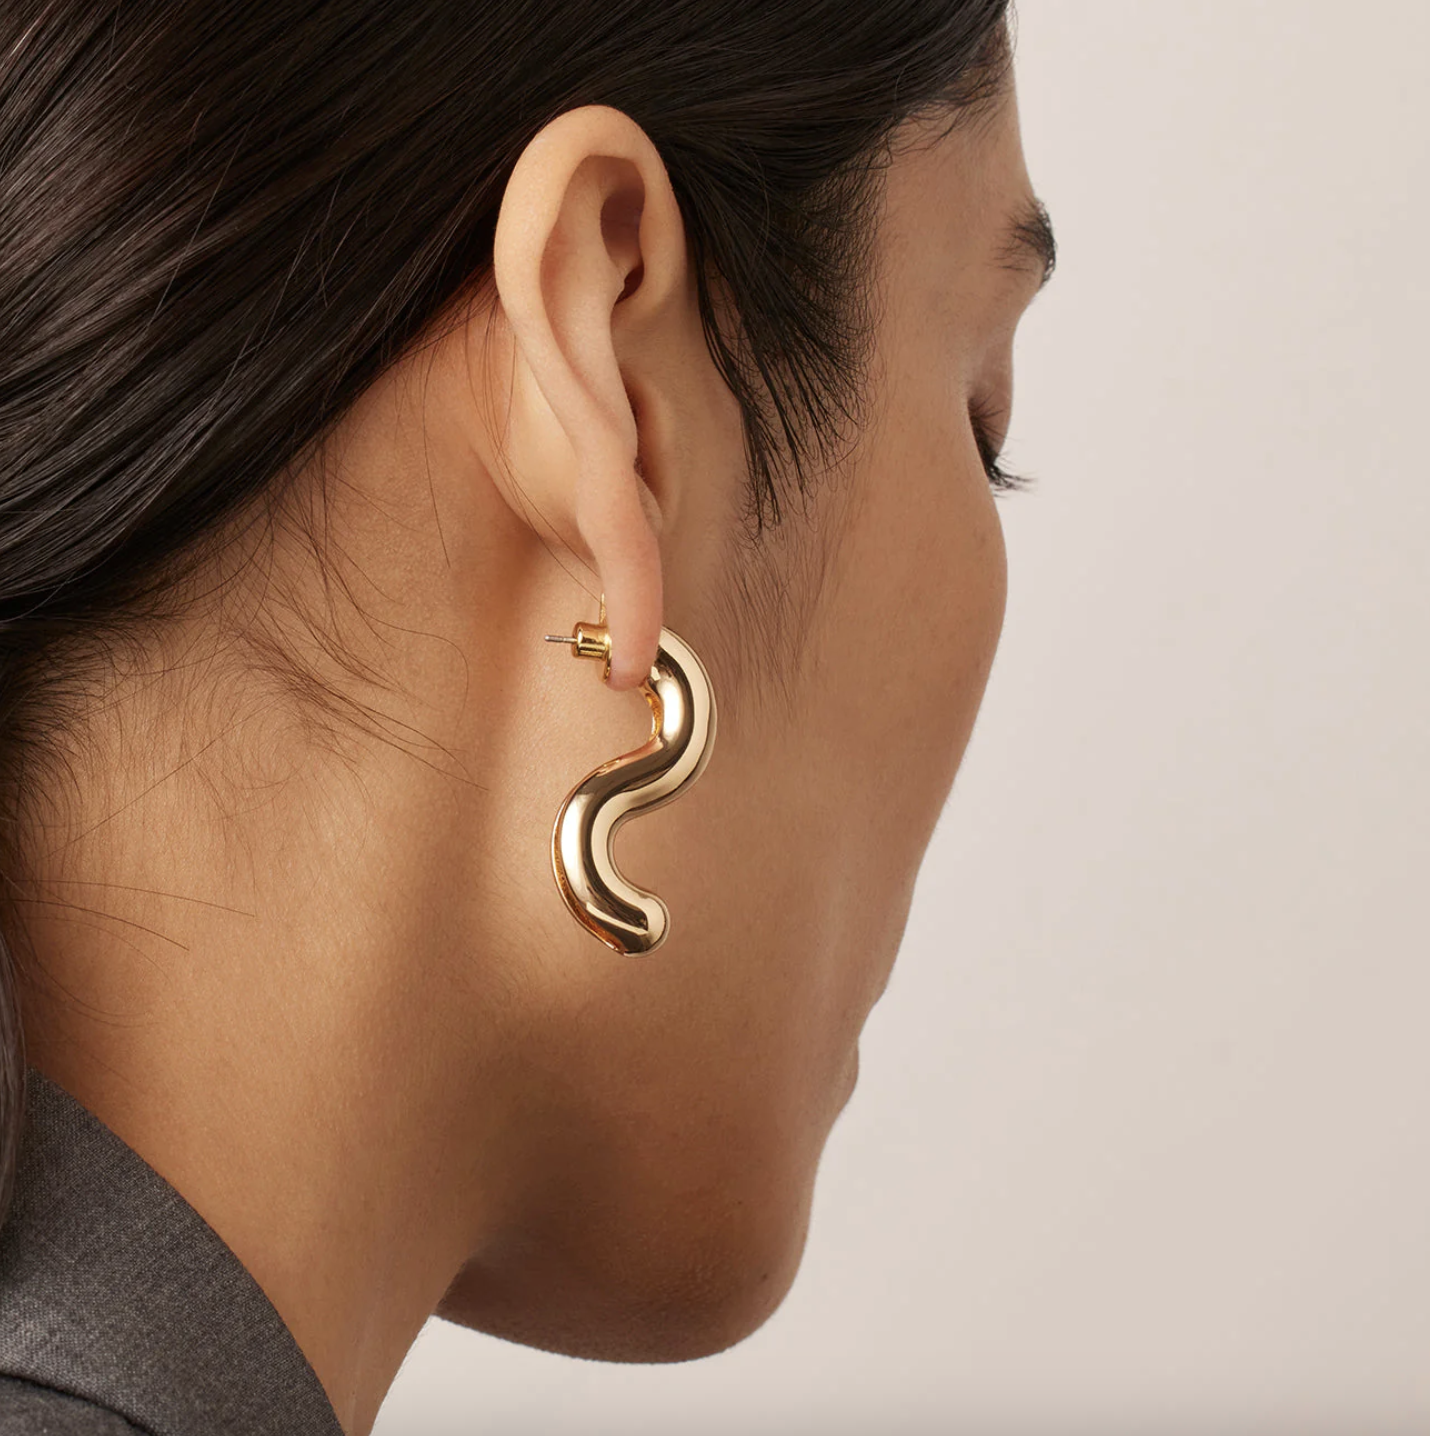 a person wearing the squiggly earrings